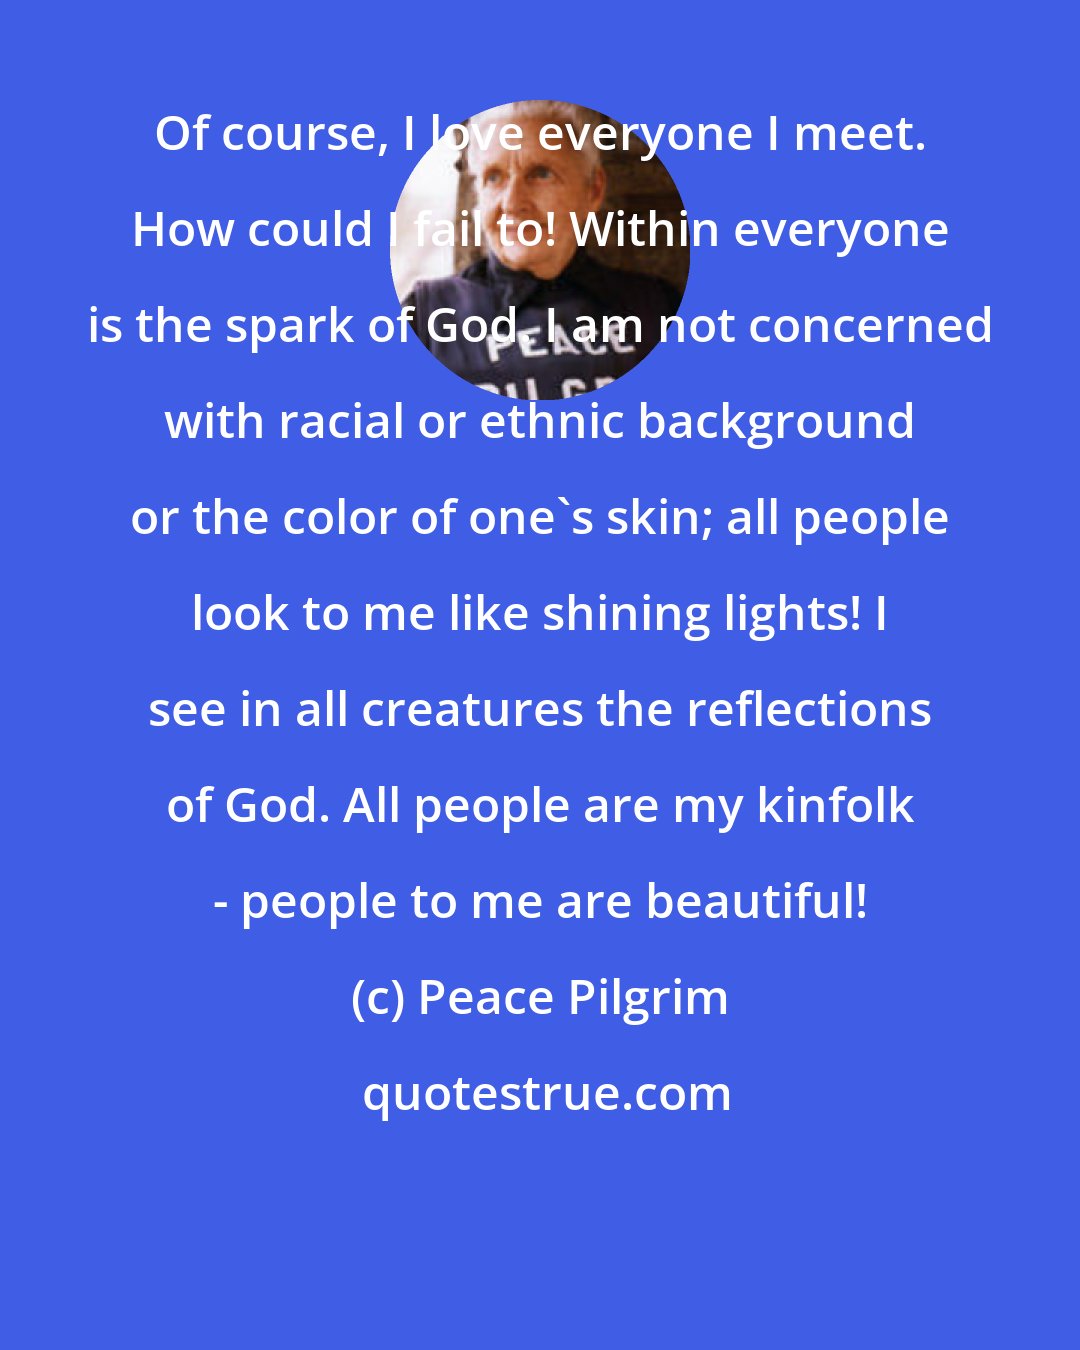 Peace Pilgrim: Of course, I love everyone I meet. How could I fail to! Within everyone is the spark of God. I am not concerned with racial or ethnic background or the color of one's skin; all people look to me like shining lights! I see in all creatures the reflections of God. All people are my kinfolk - people to me are beautiful!